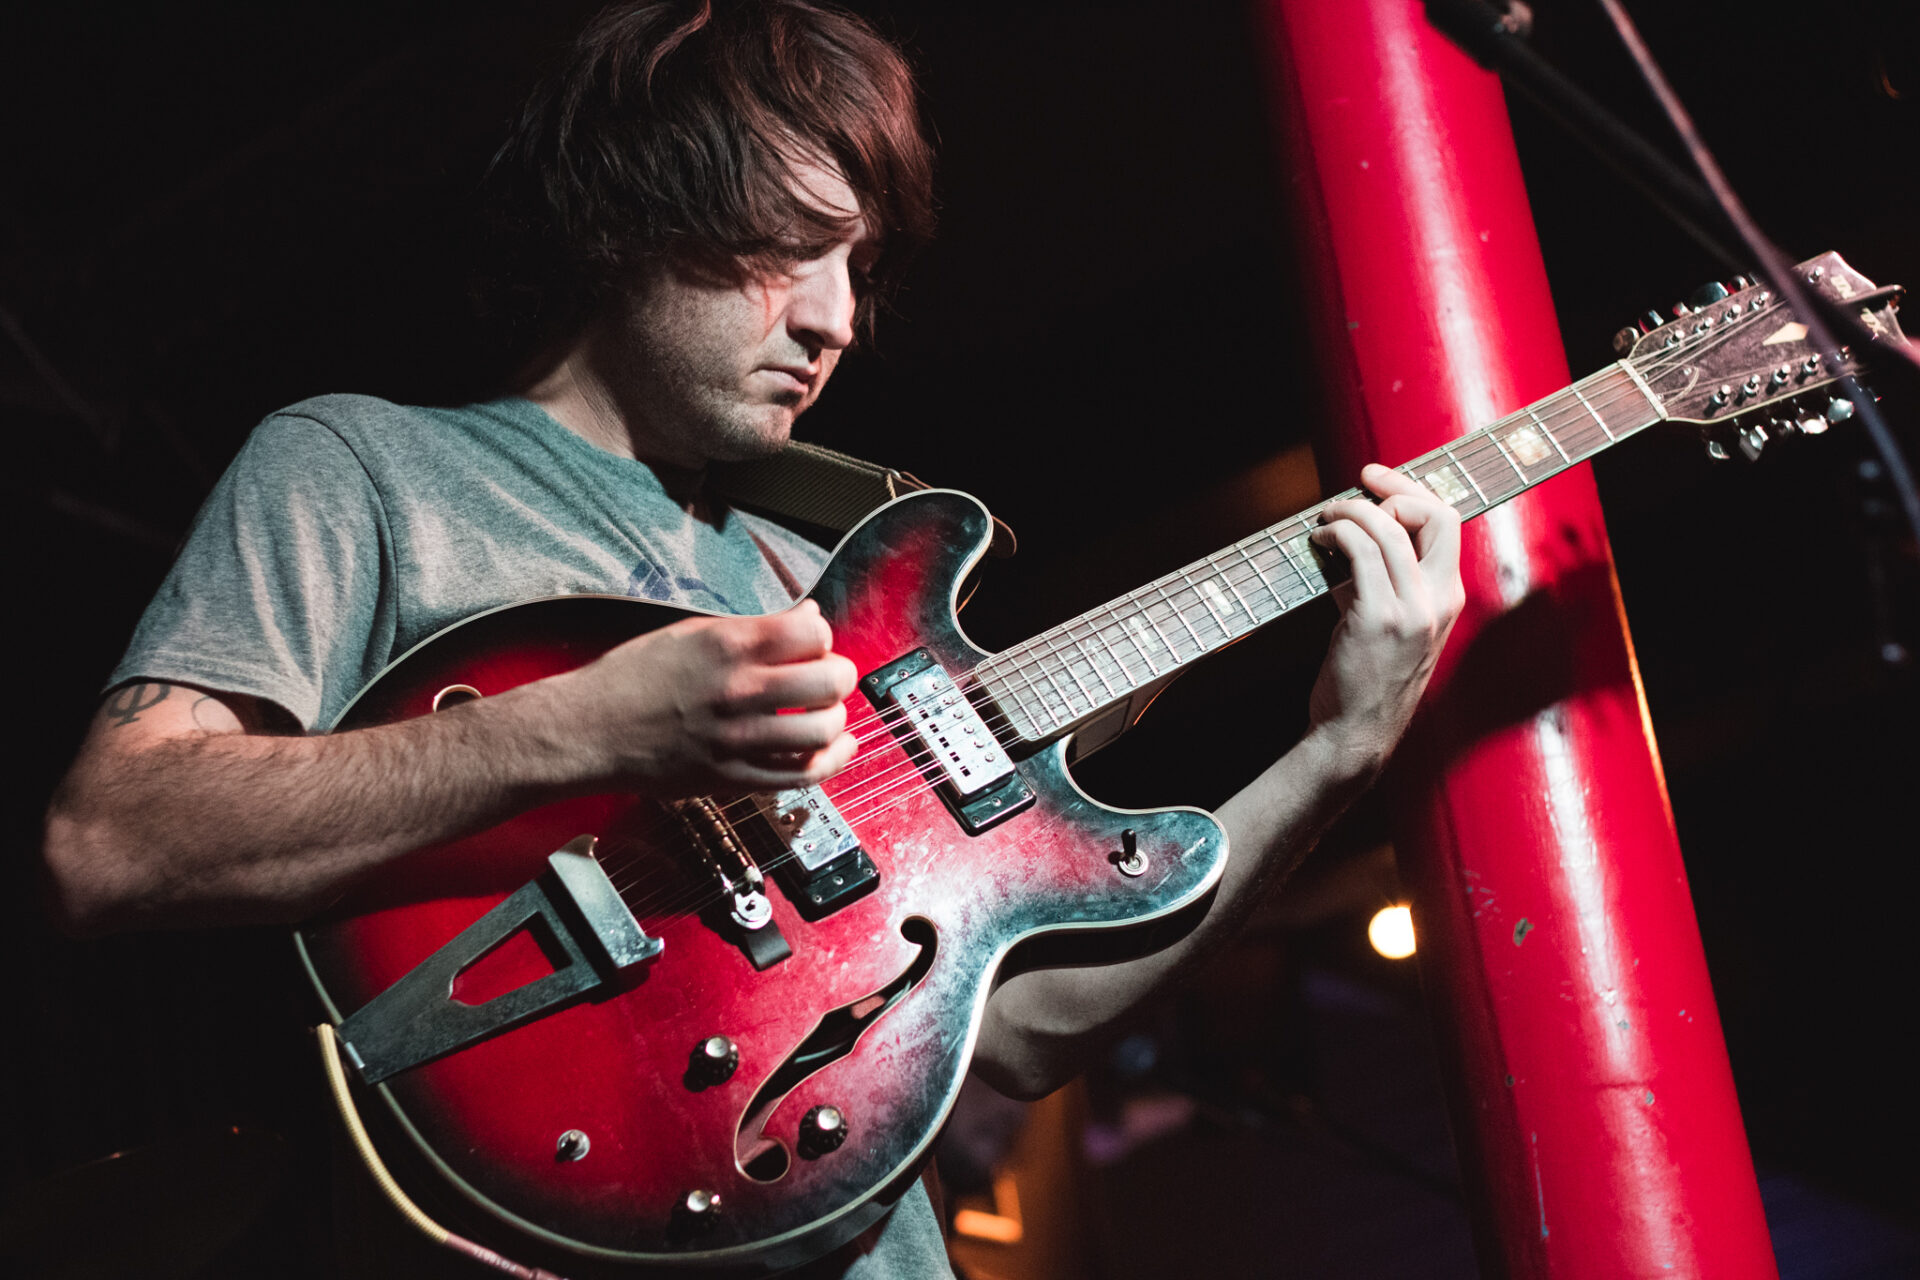 IN PICTURES: Mikal Cronin, Theo Verney, Veronica Bianqui - Sound Control Manchester, 19th November 2015 13